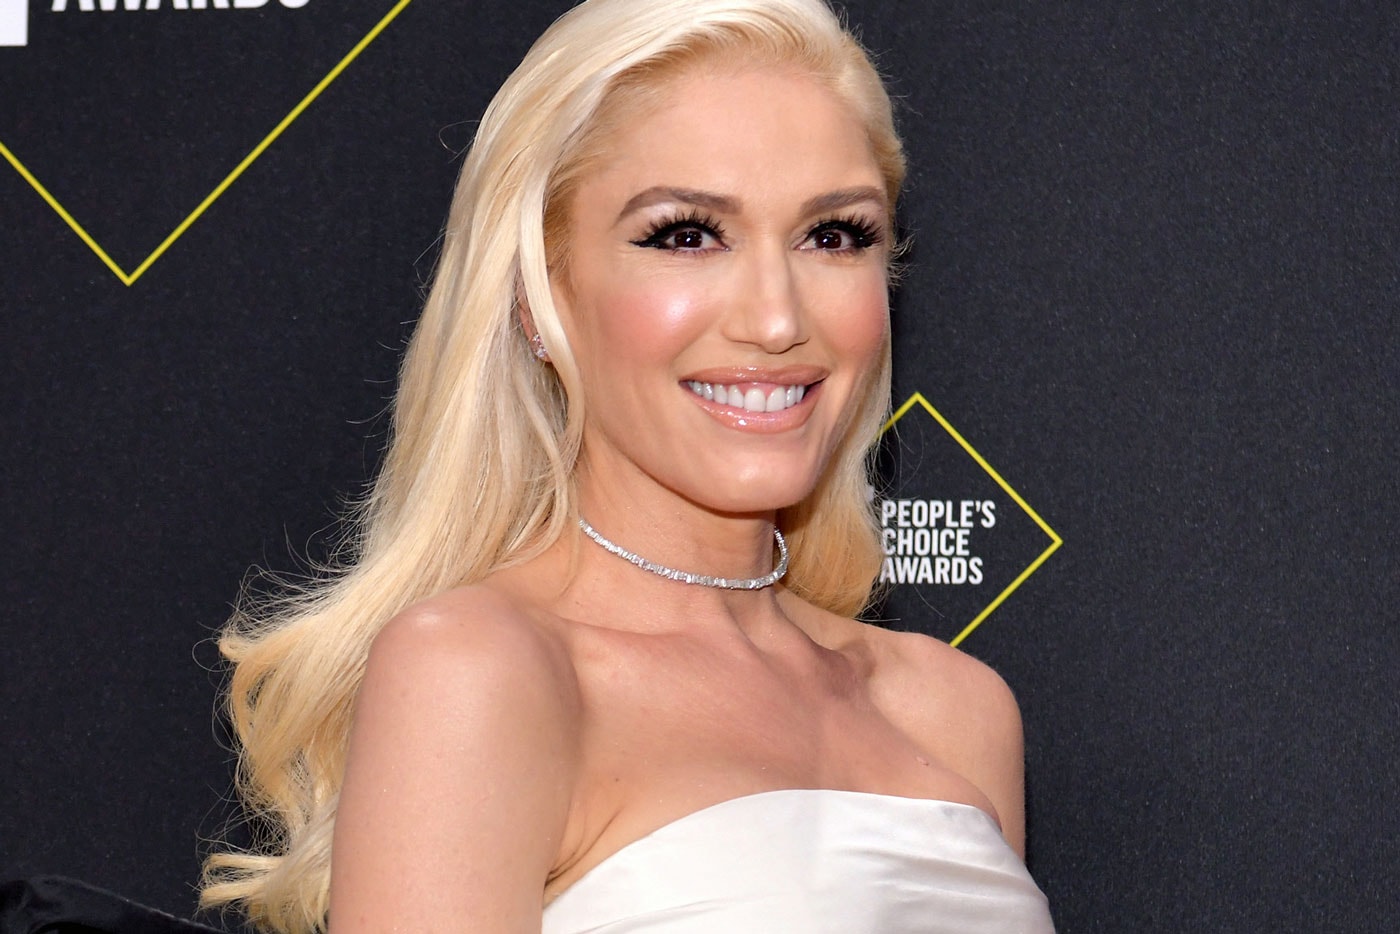 Gwen Stefani Releases "Used To Love You" Video